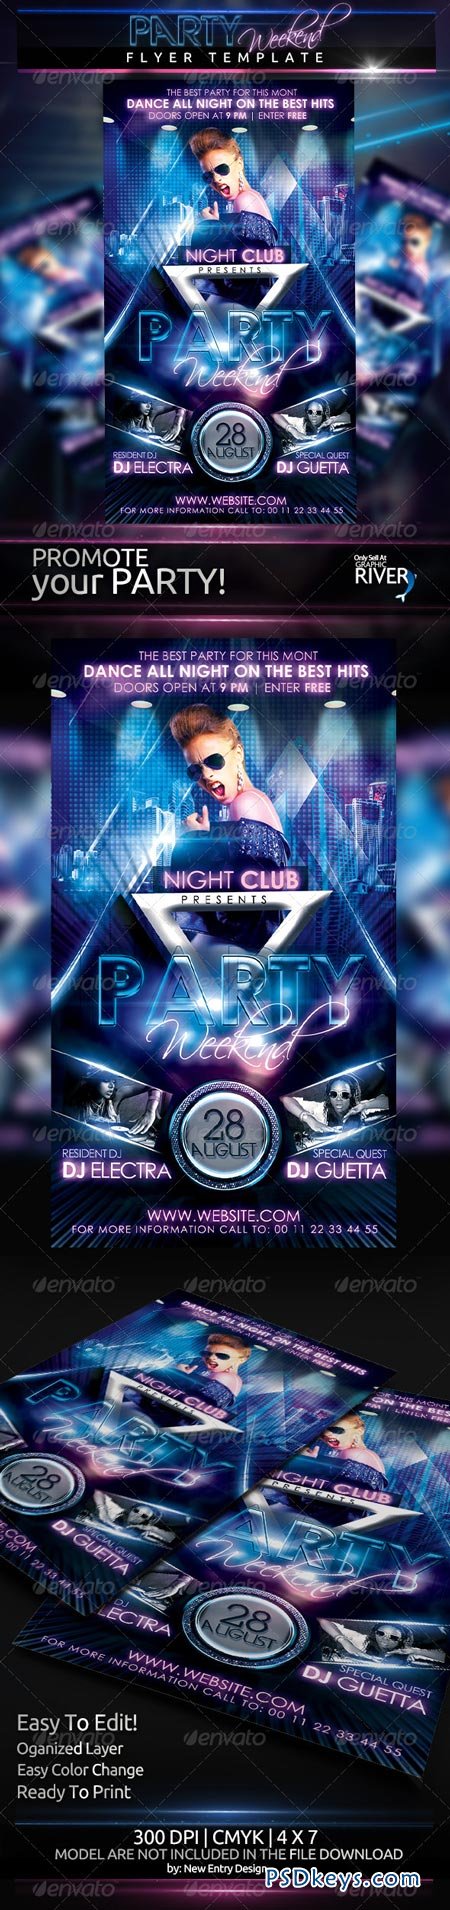 Party Weekend Flyer Template 4676868